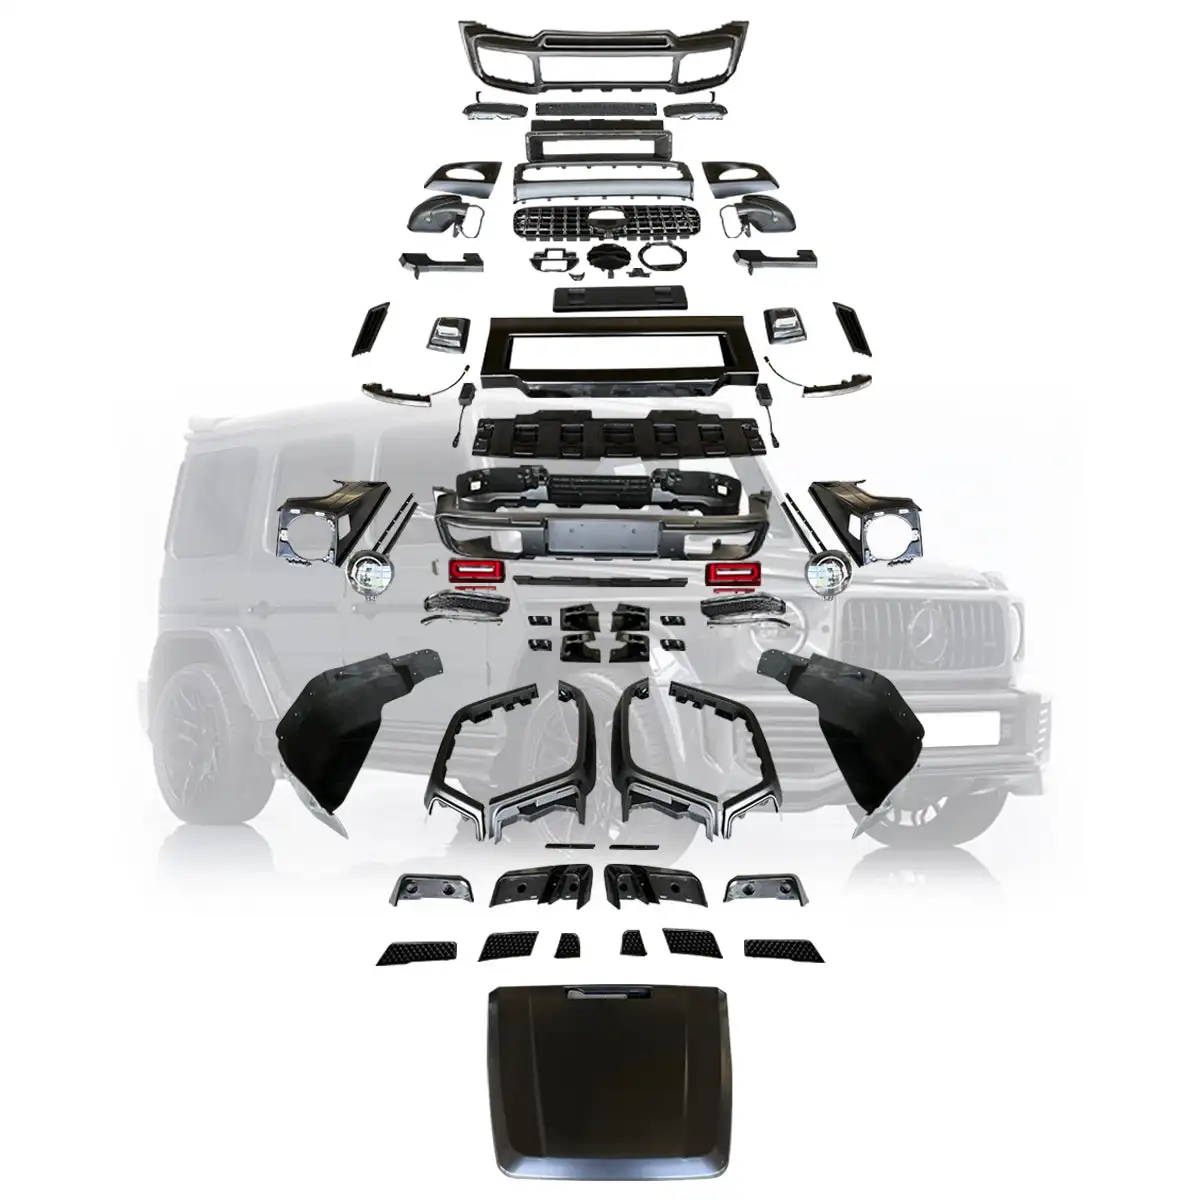 Body Kit For Mercedes-Benz g class Upgrade W463 to W464 B Style Facelift Full Set  Hood Front Bumpers Fenders BODYKIT